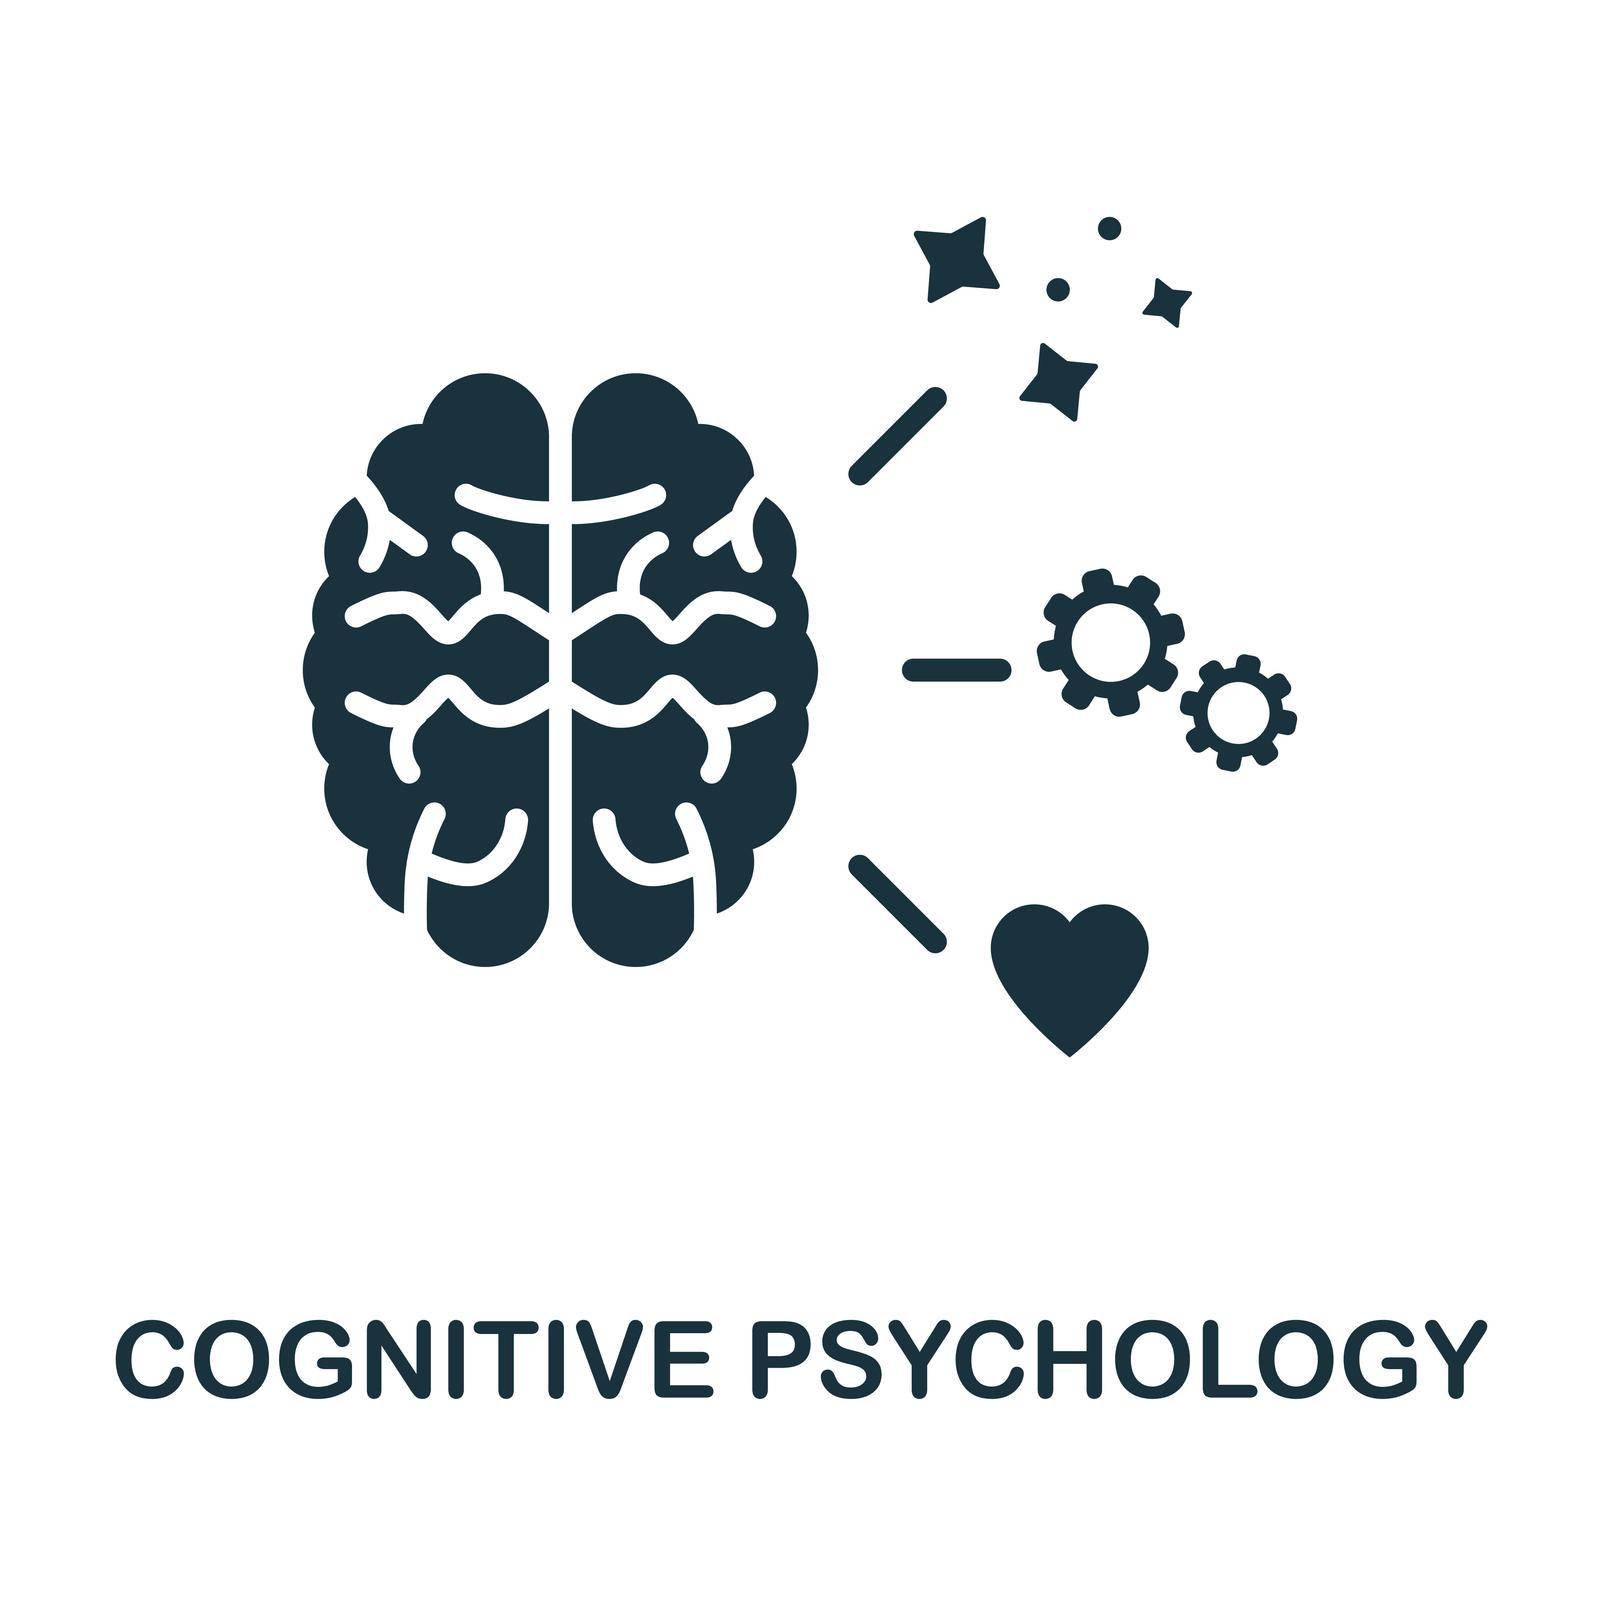 Cognitive Psychology icon. Monochrome sign from cognitive skills collection. Creative Cognitive Psychology icon illustration for web design, infographics and more by simakovavector